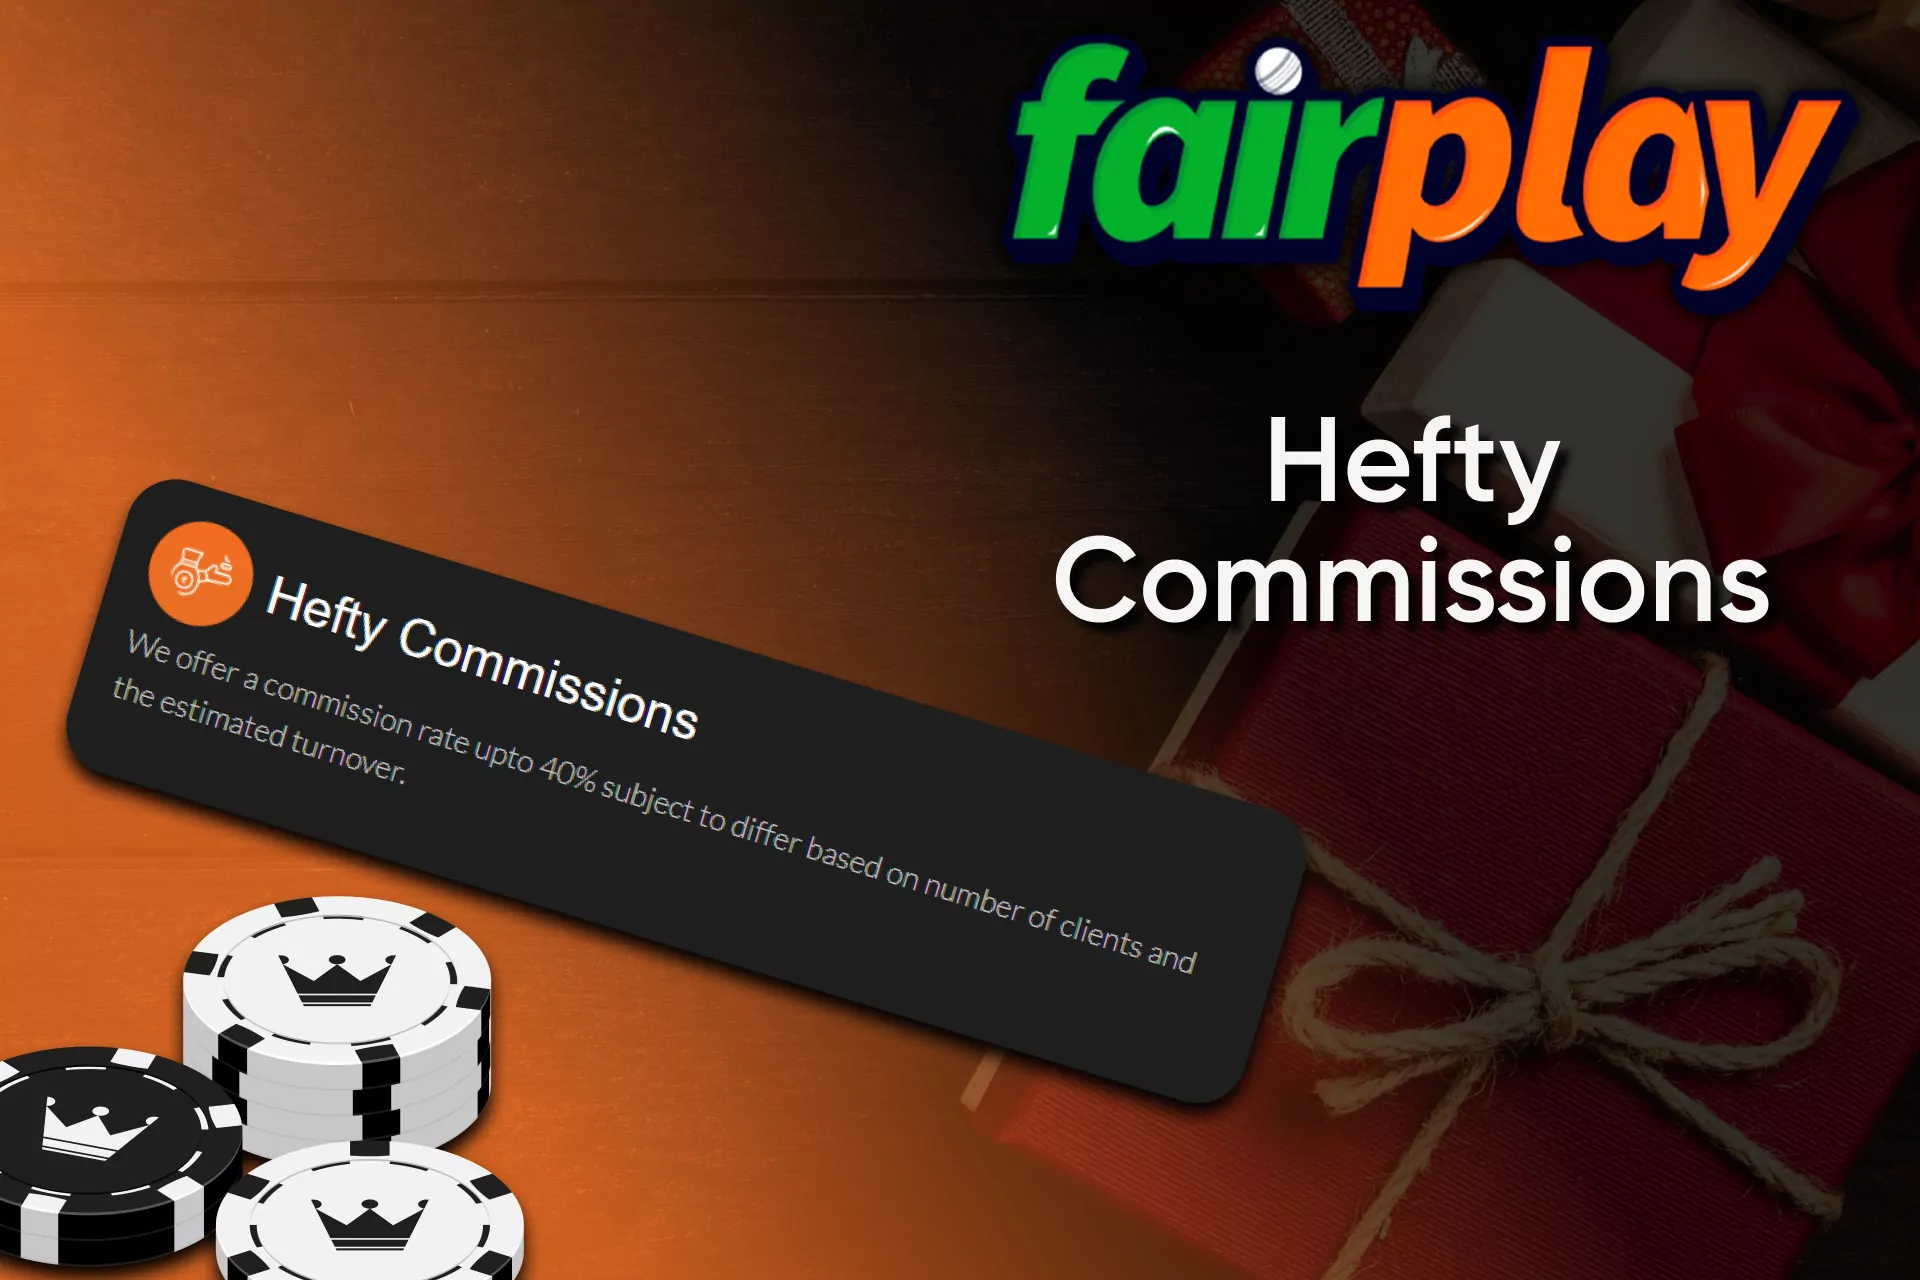 According to the Fairplay affiliate program rules, you get a commission for every invited friend.